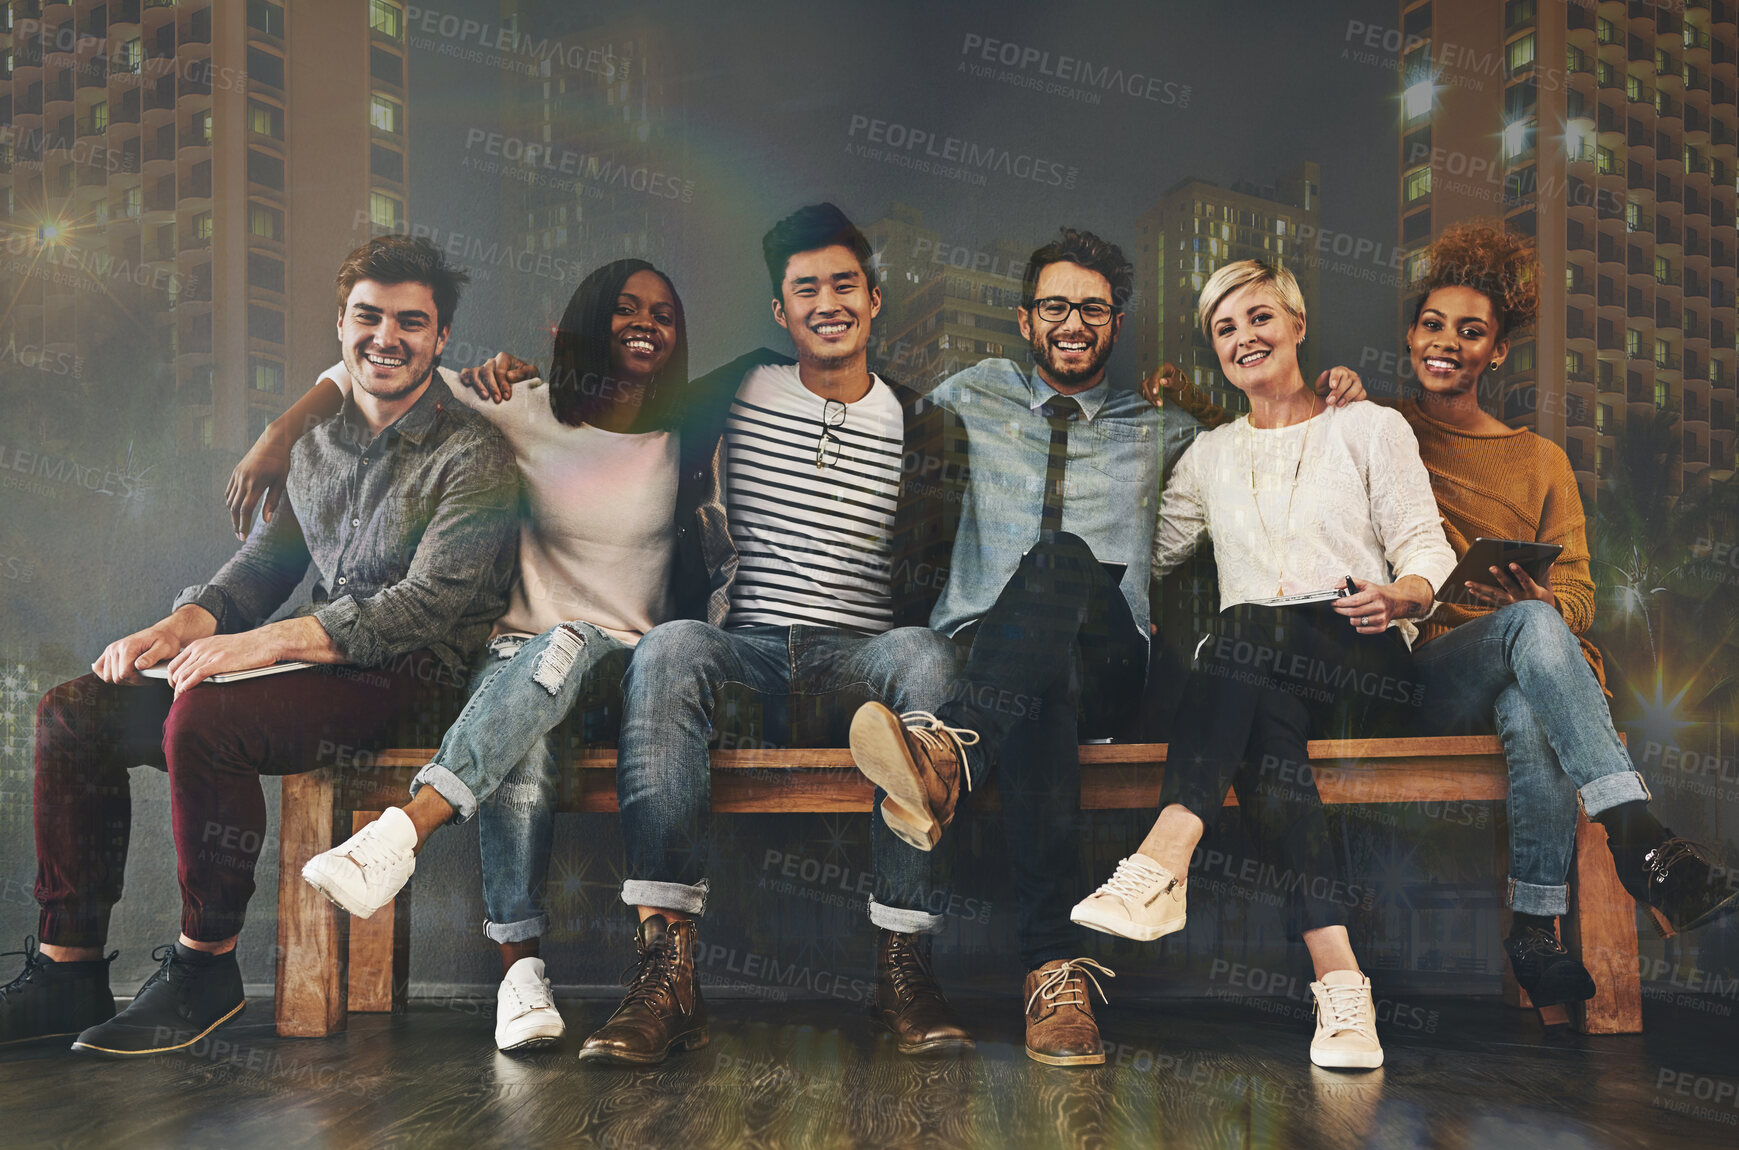 Buy stock photo Diversity, friendship and portrait of people with a city background sitting together. Happy, smile and multiracial young friends hugging or embracing on a bench with support, unity and community.